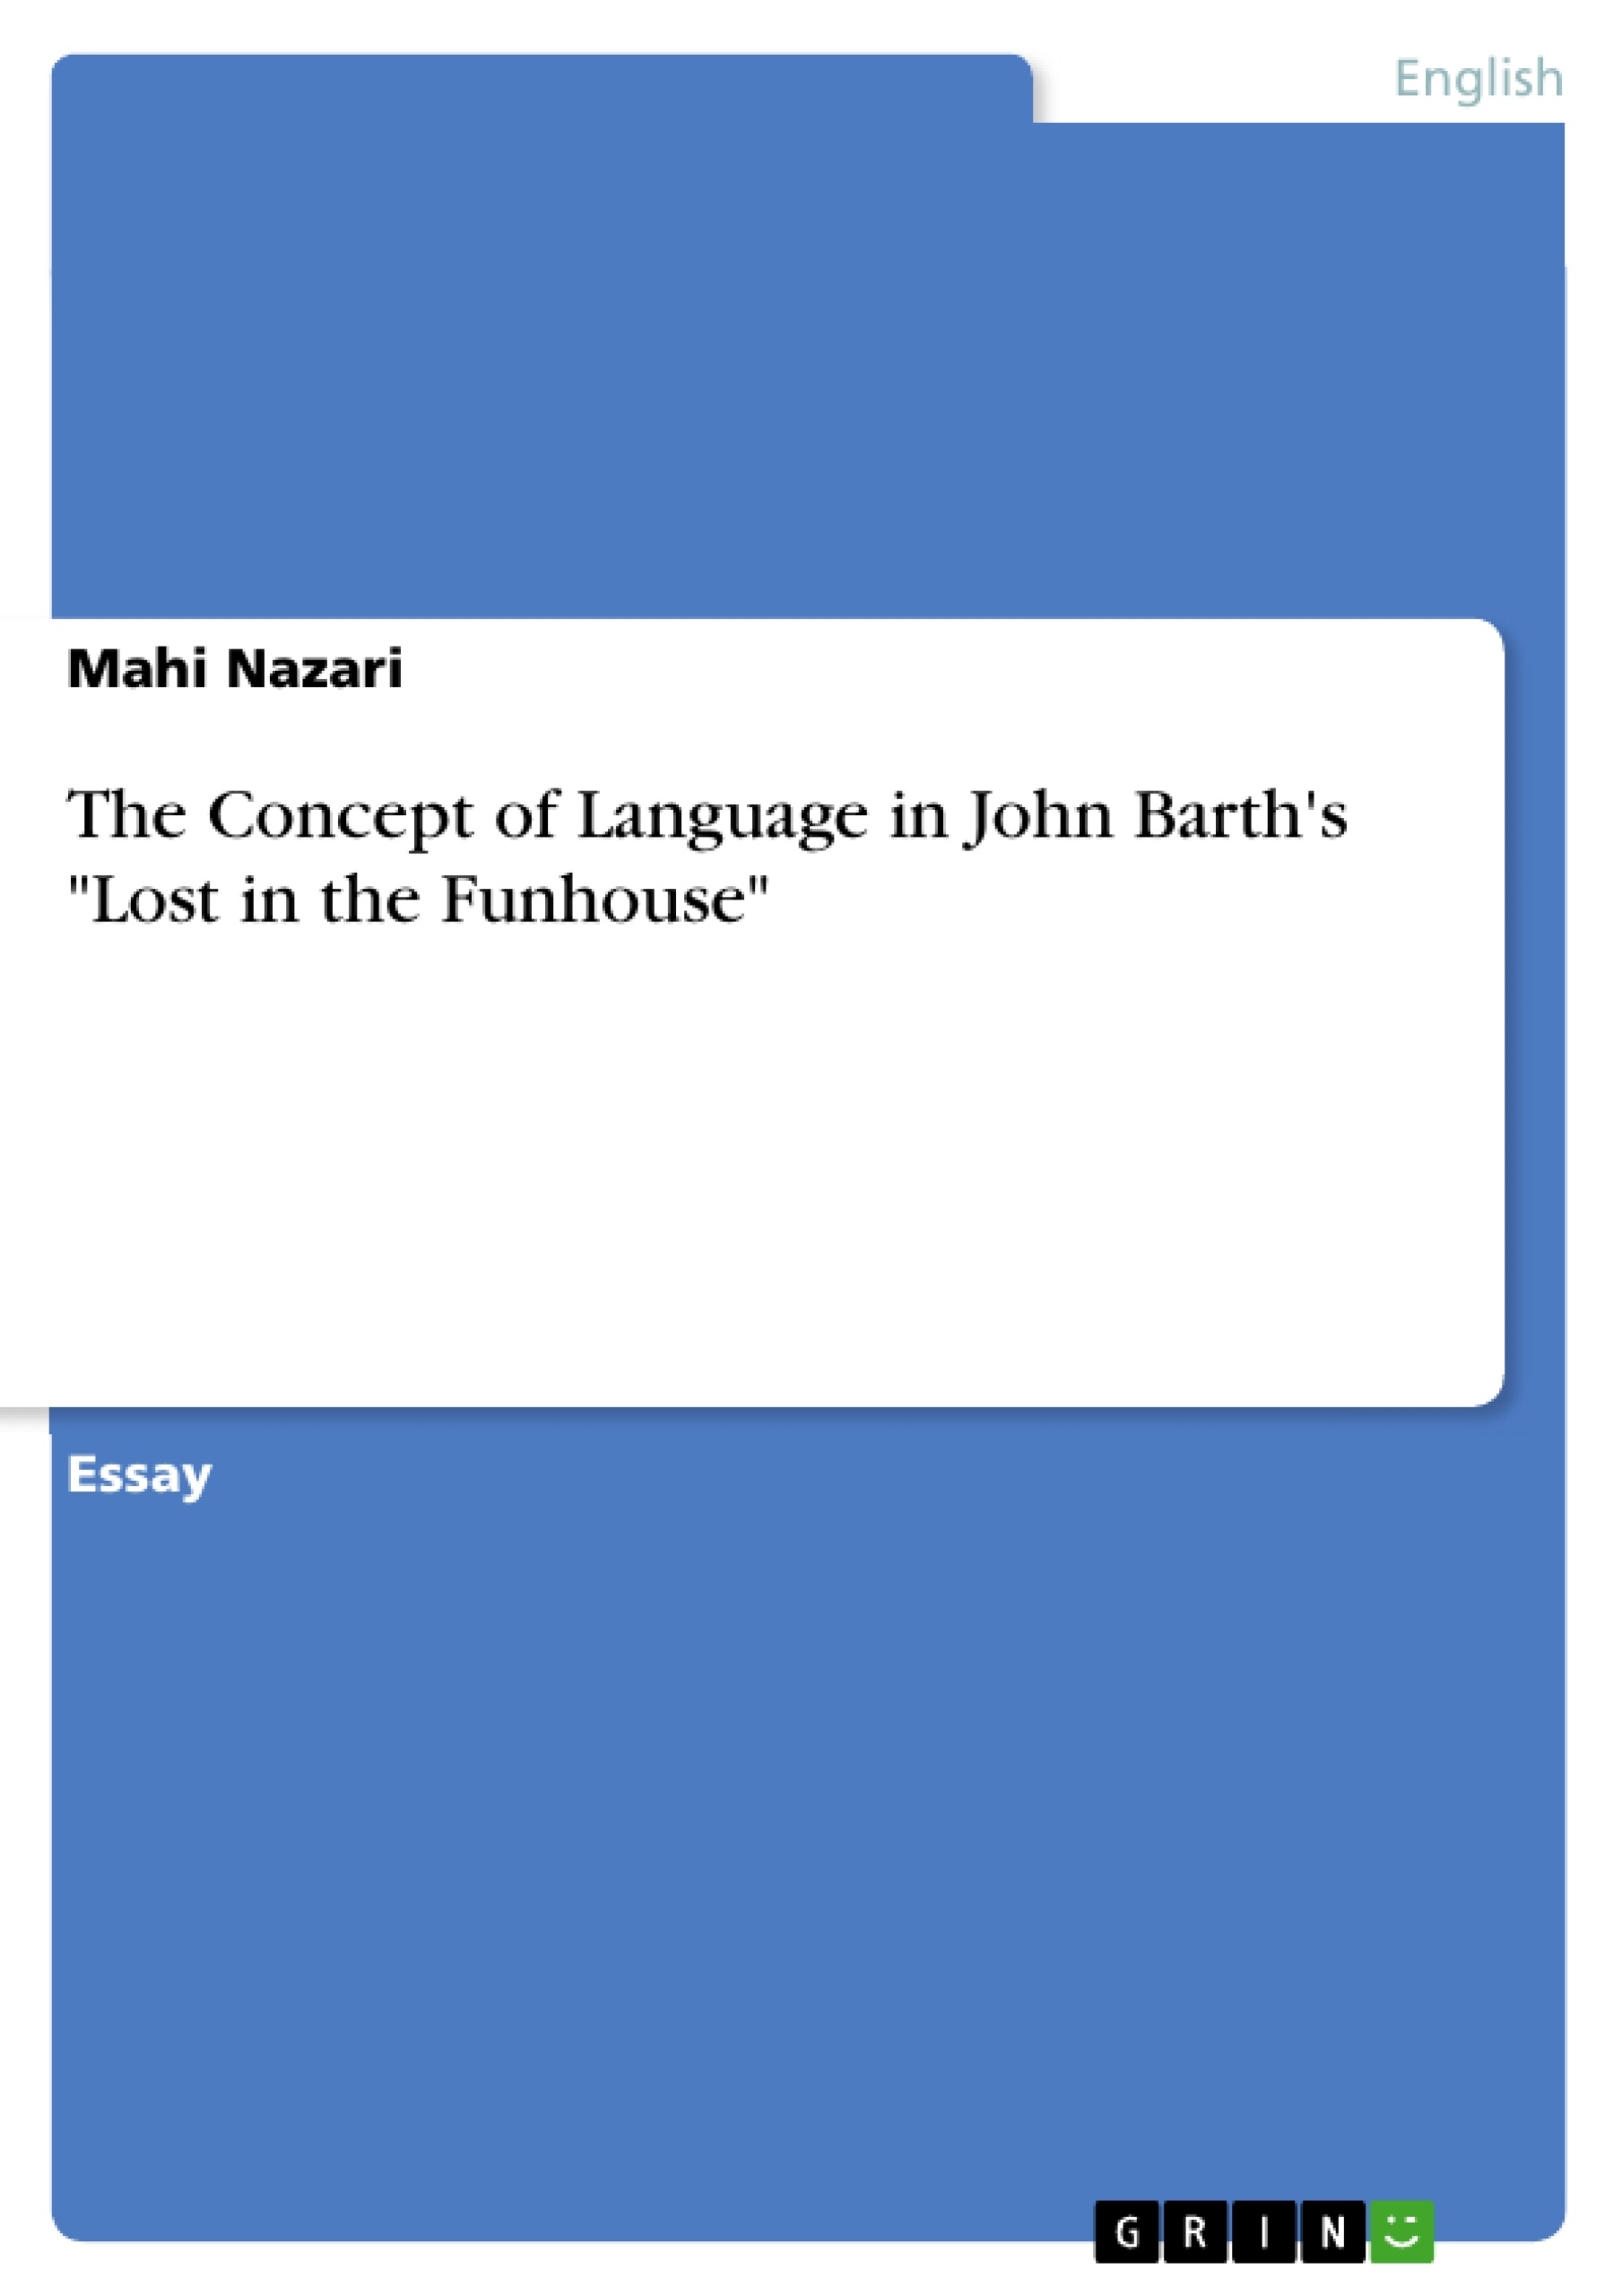 Titre: The Concept of Language in John Barth's "Lost in the Funhouse"